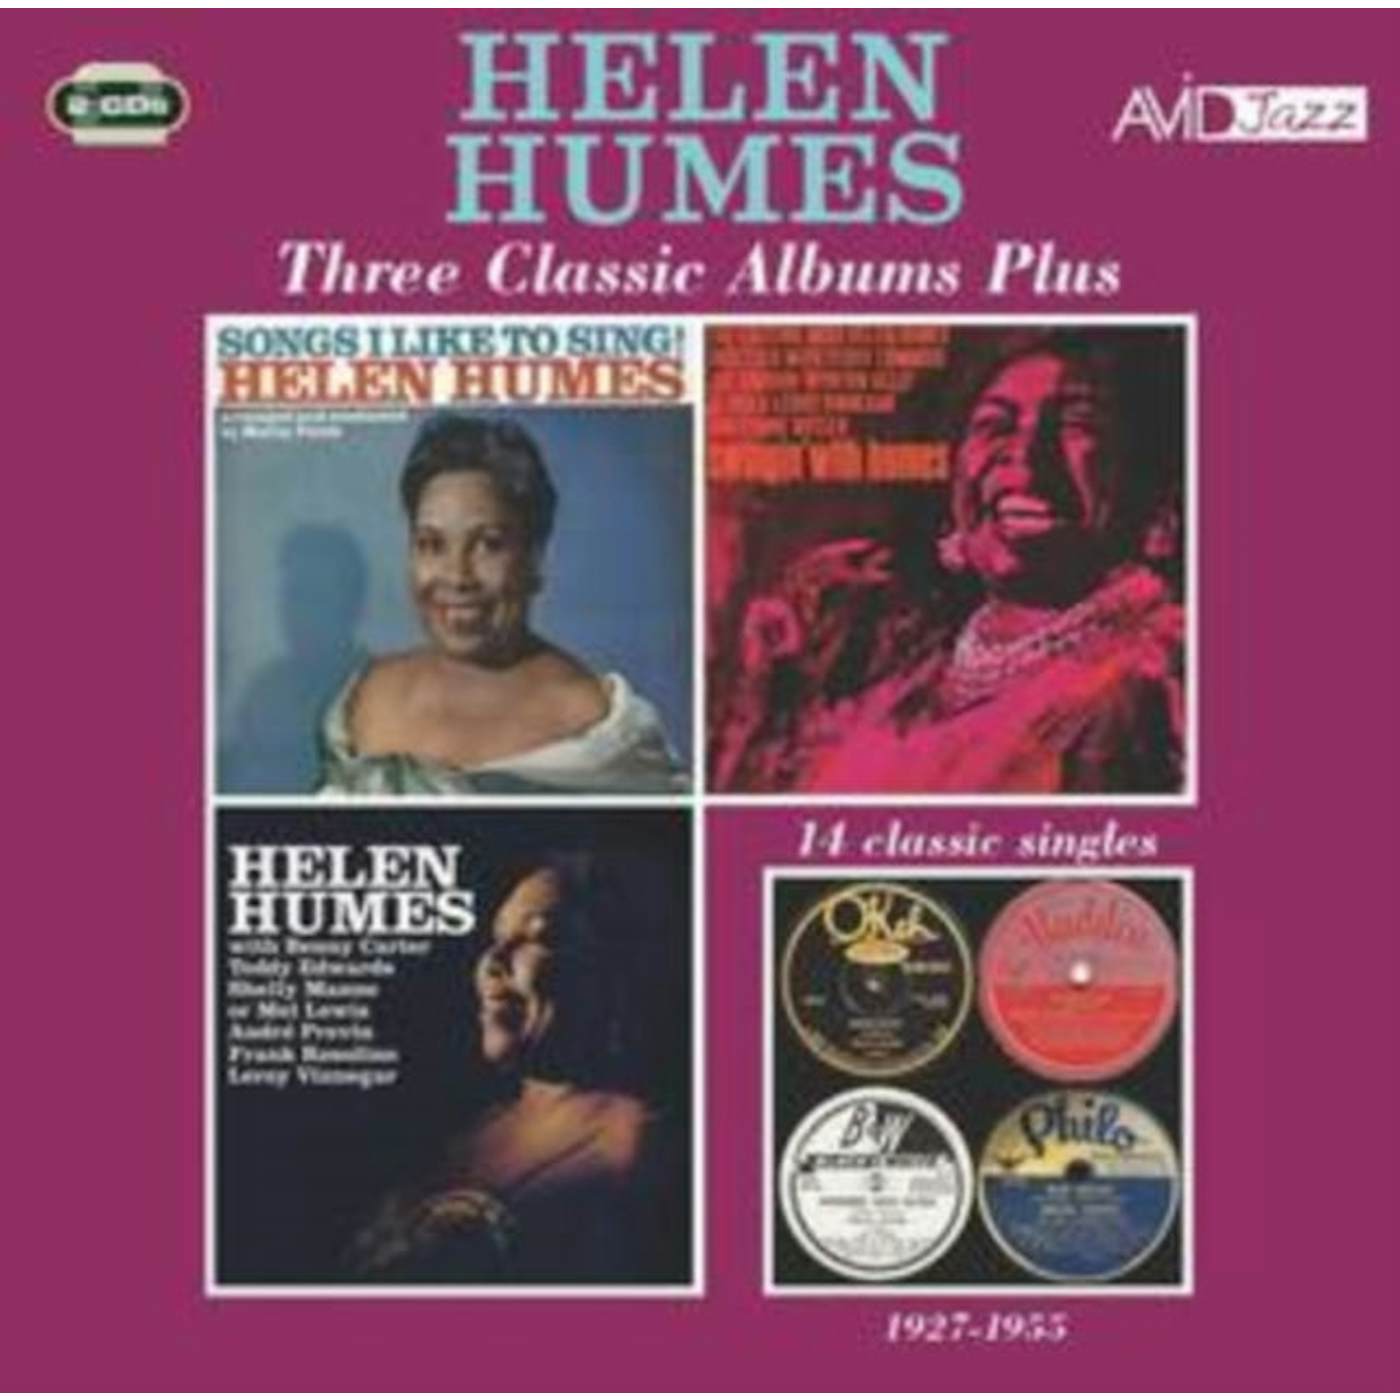 Helen Humes CD - Three Classic Albums Plus (Songs I Like To Sing! / Swingin' With Humes / Helen Humes)